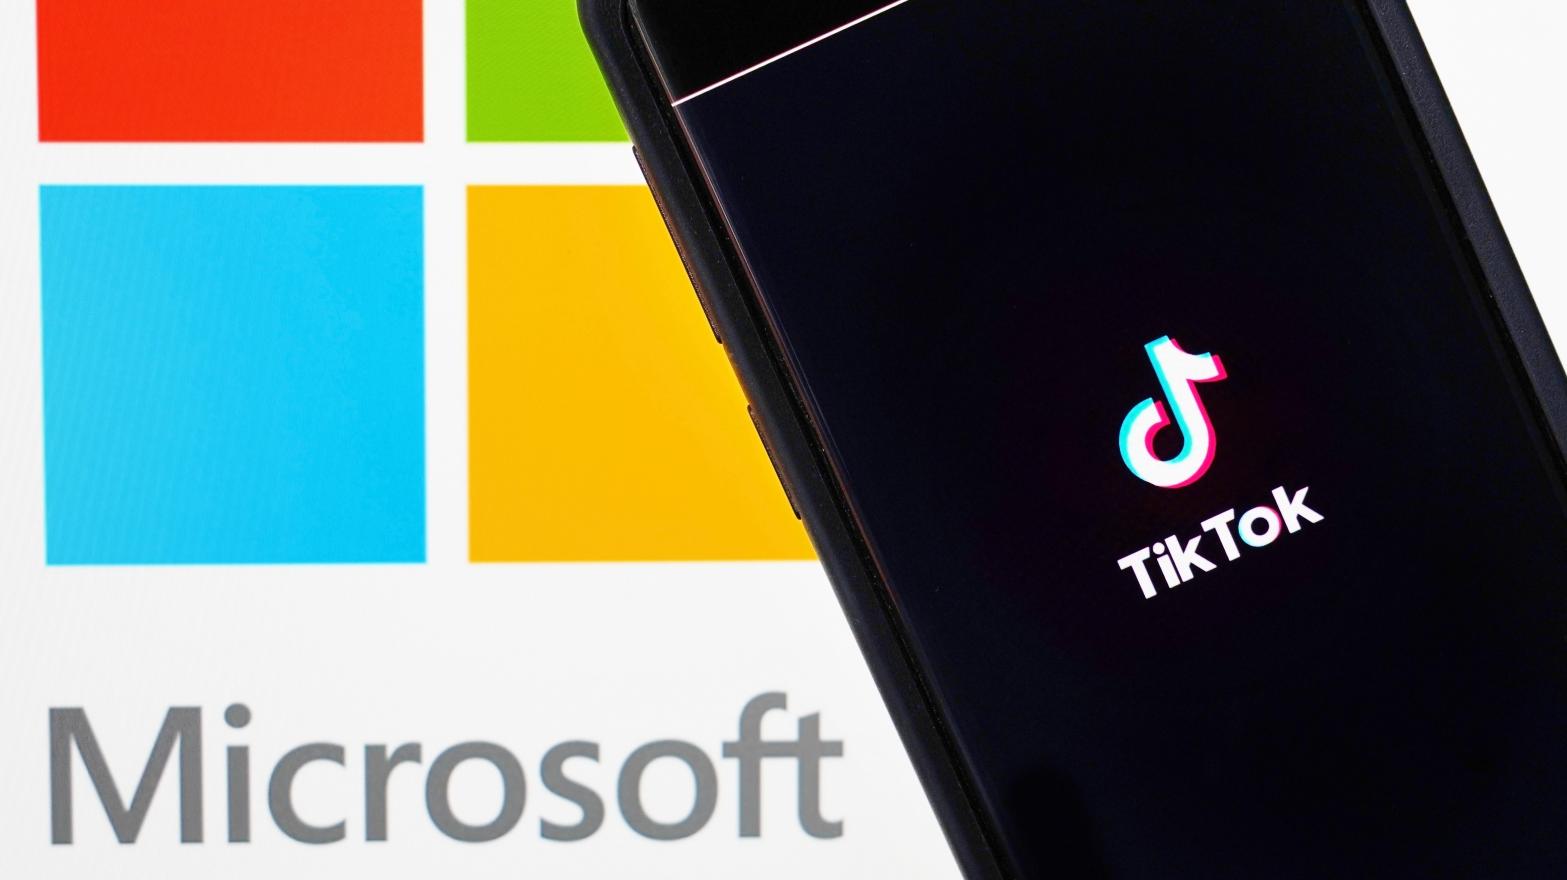 Microsoft security researchers told TikTok of a pretty major security flaw back in February, and the company said that exploit has since been patched. (Photo: Cindy Ord, Getty Images)